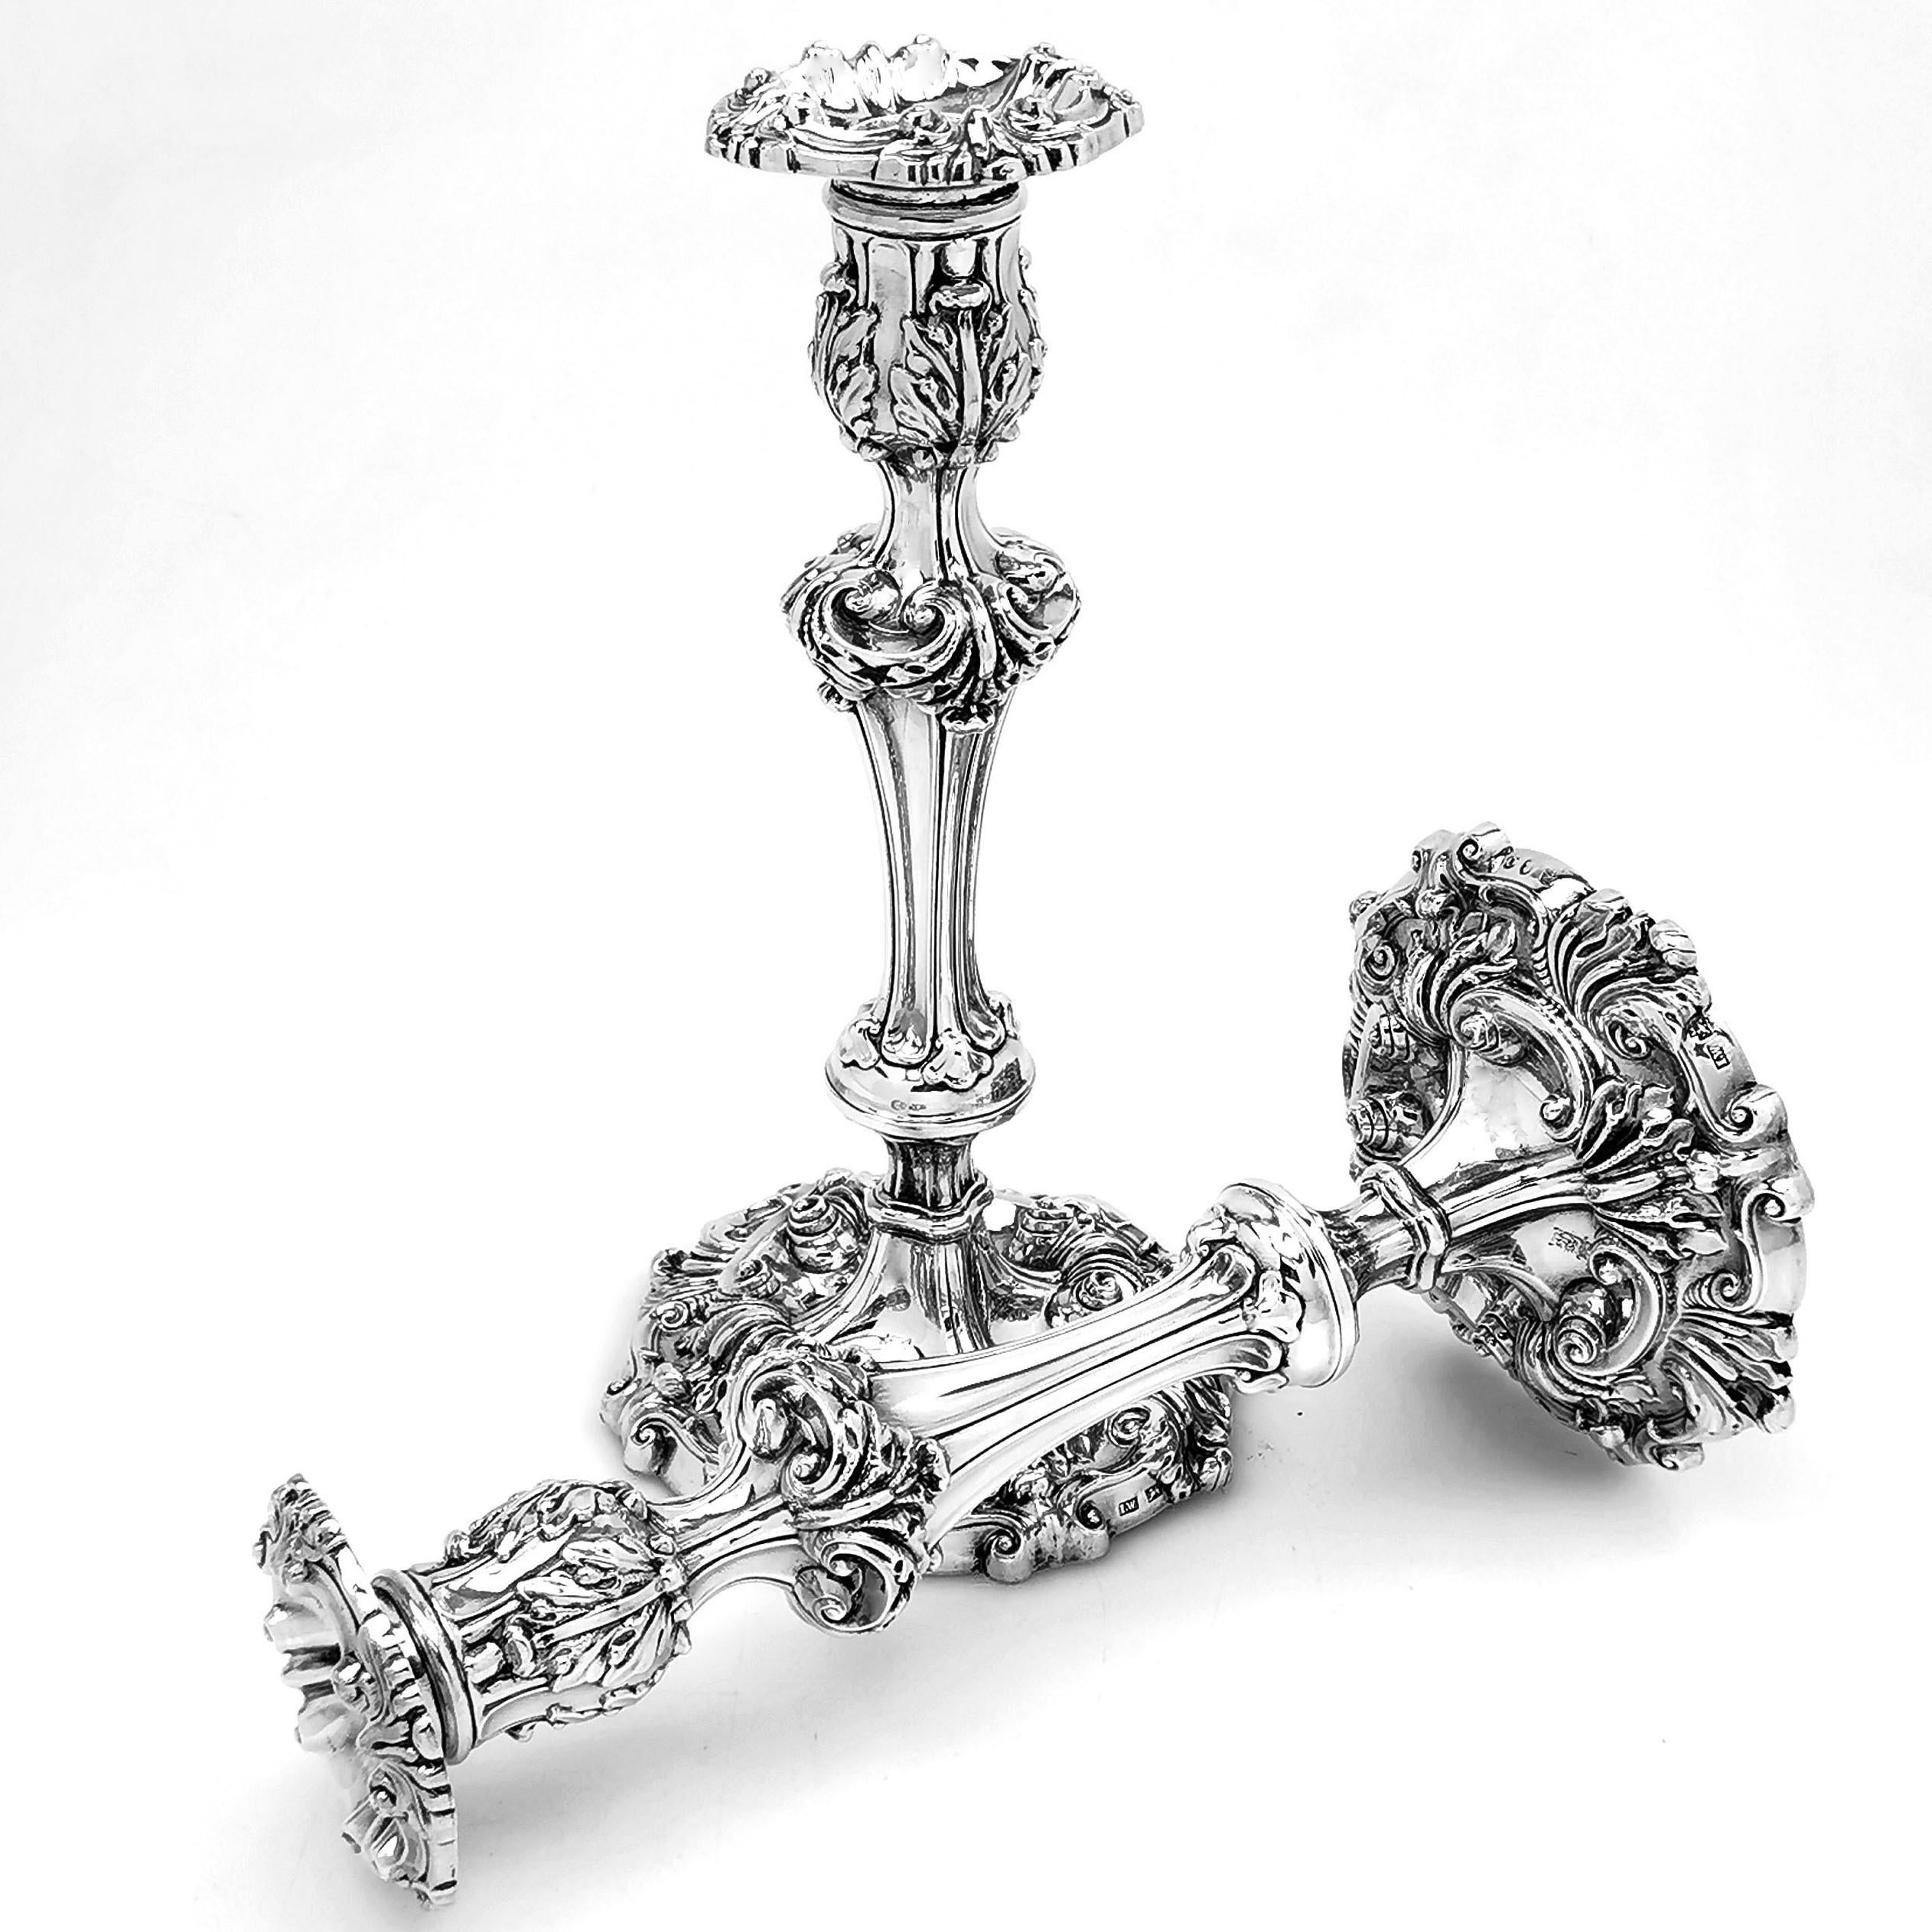 A pair of magnificent antique George III solid silver candlesticks decorate with ornate chased designs on the spread foot, the knopped column, the capital and the removable sconce. Each candlestick and sconce have a small engraved crest.

Made in